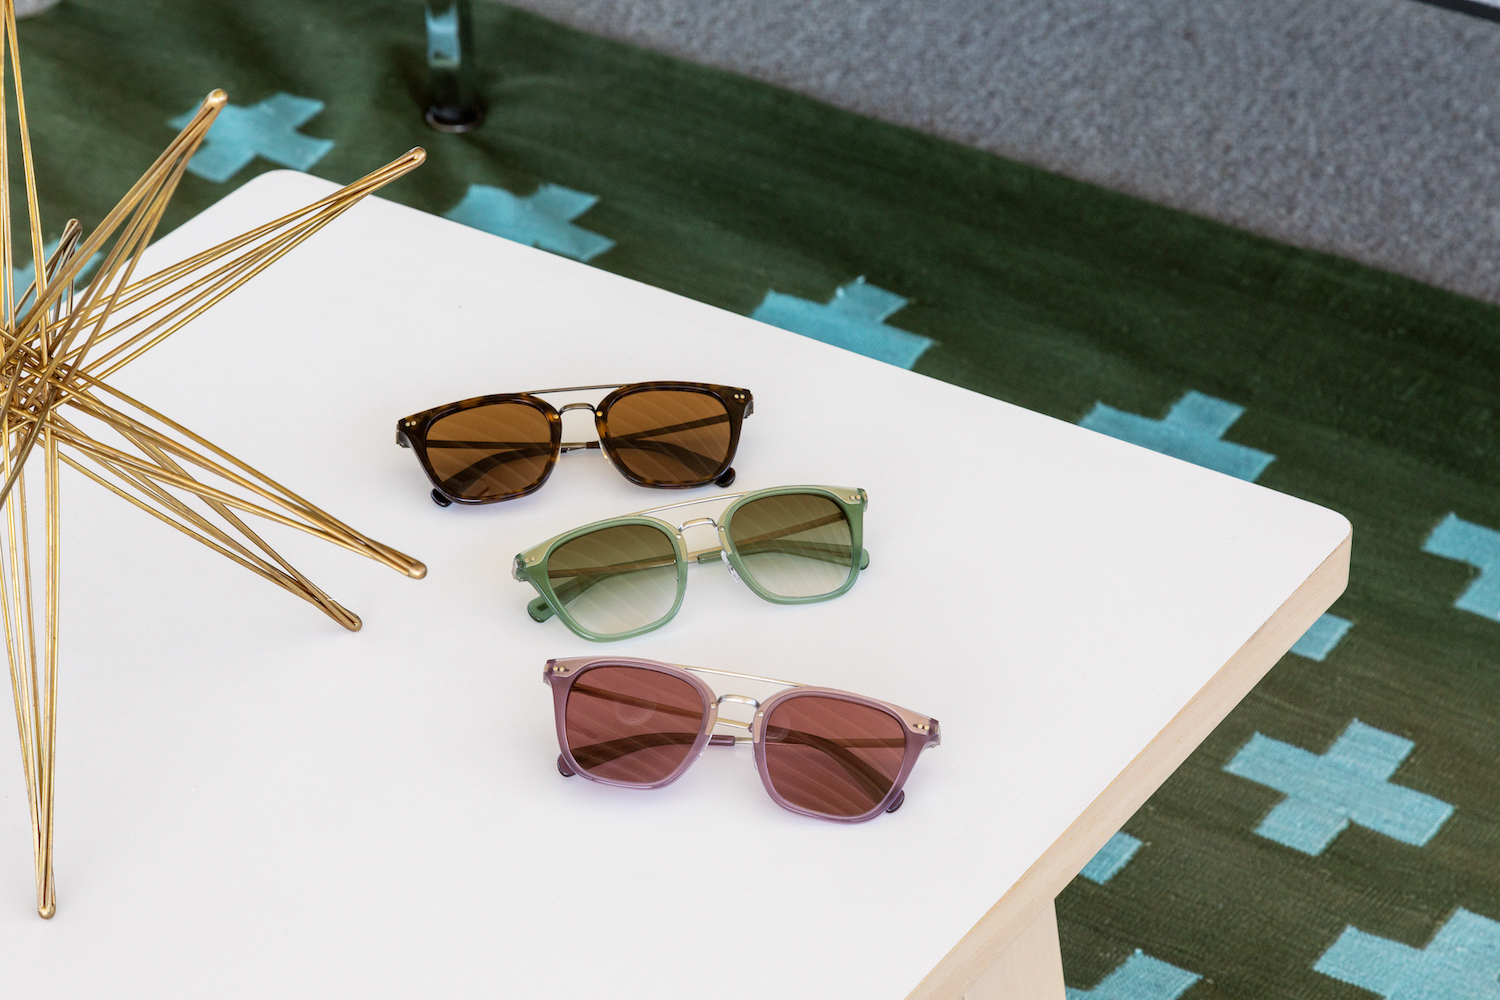 FRÈRE X OLIVER PEOPLES MERGE TO CREATE THE PERFECT UPGRADE TO YOUR OPTICAL  WARDROBE, AND THE RESULTING COLLABORATION IS ELECTRIC - V Magazine